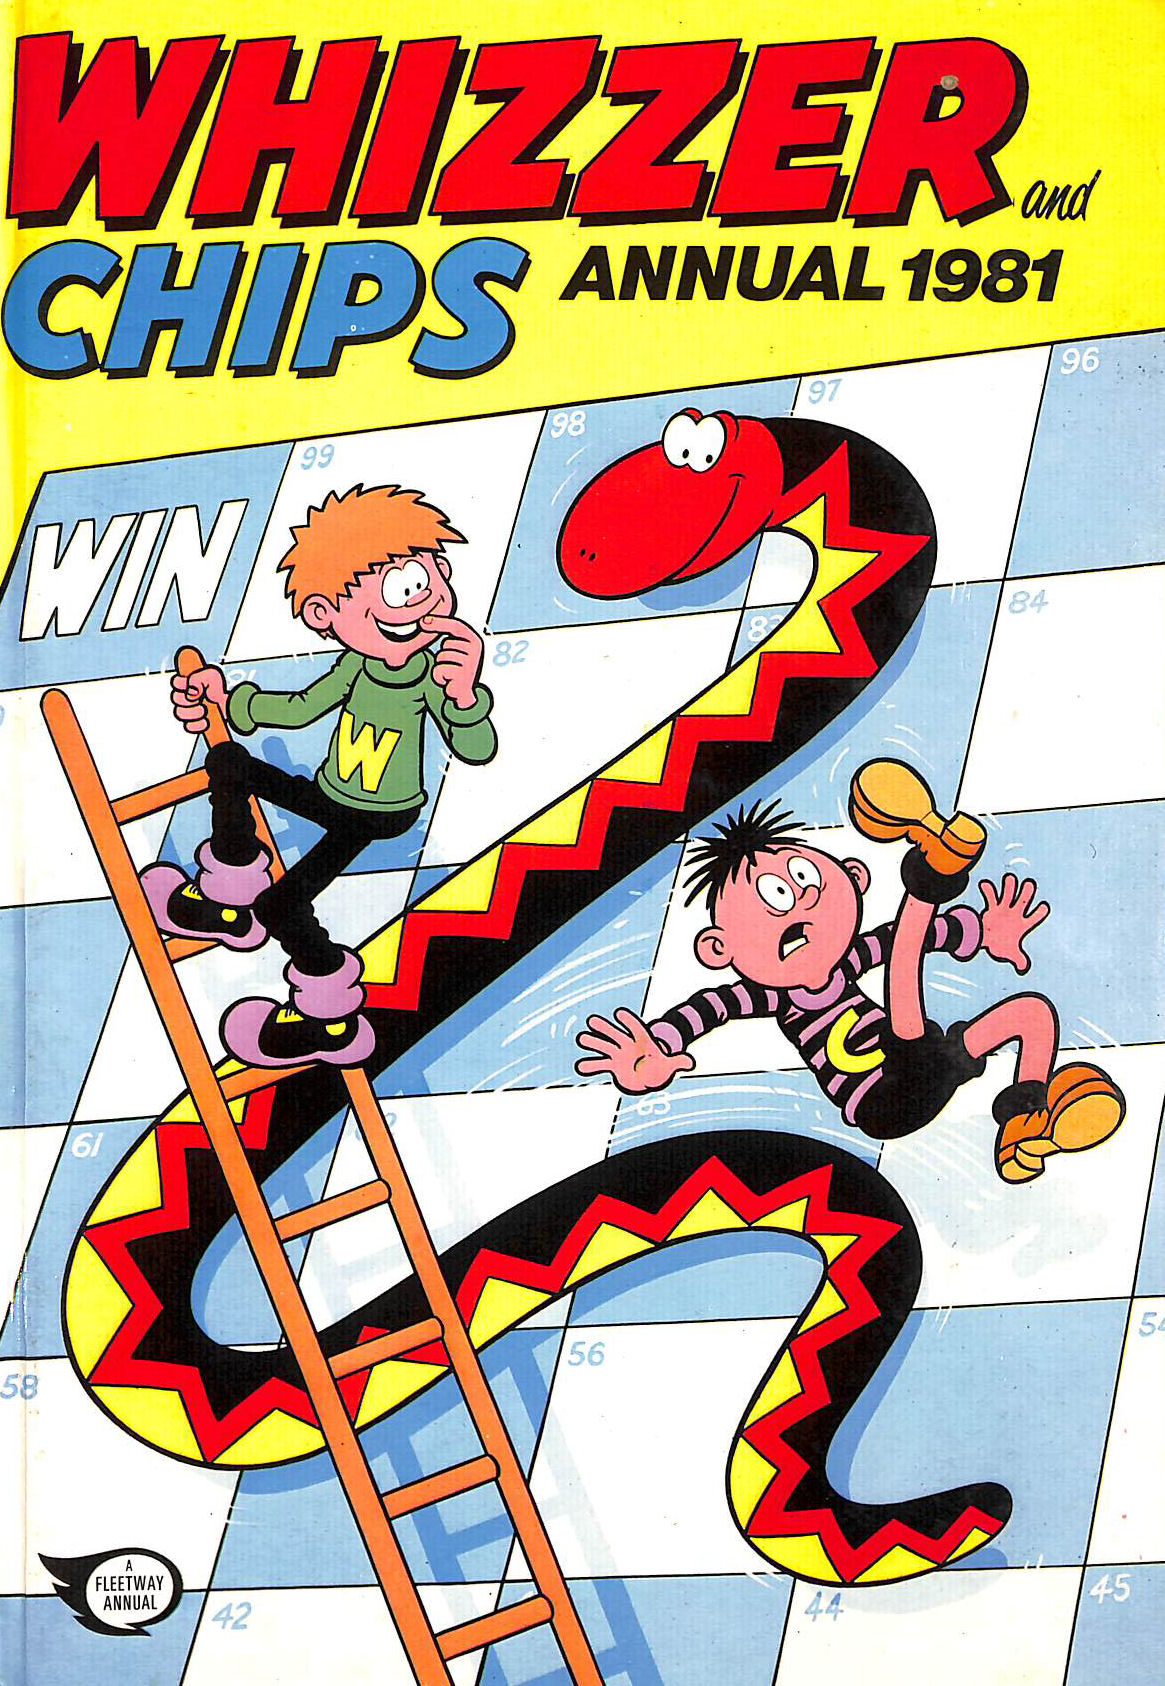 NO AUTHOR - Whizzer and Chips annual 1981